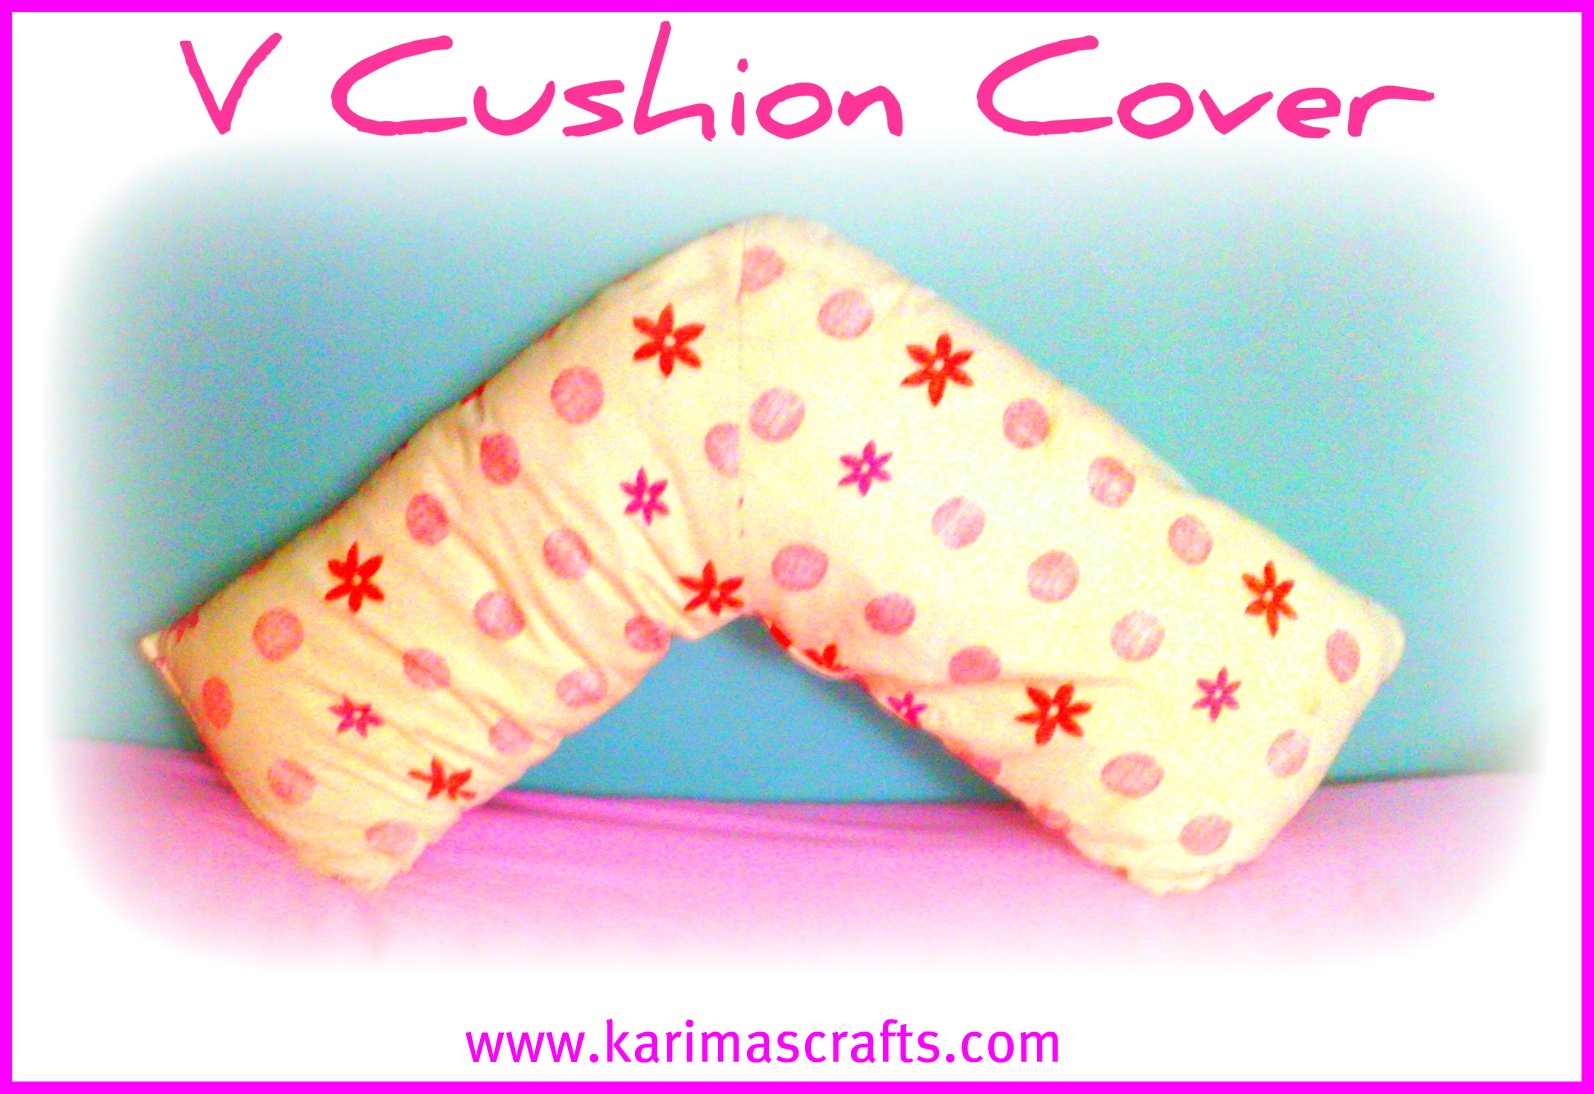 Vcushioncover 